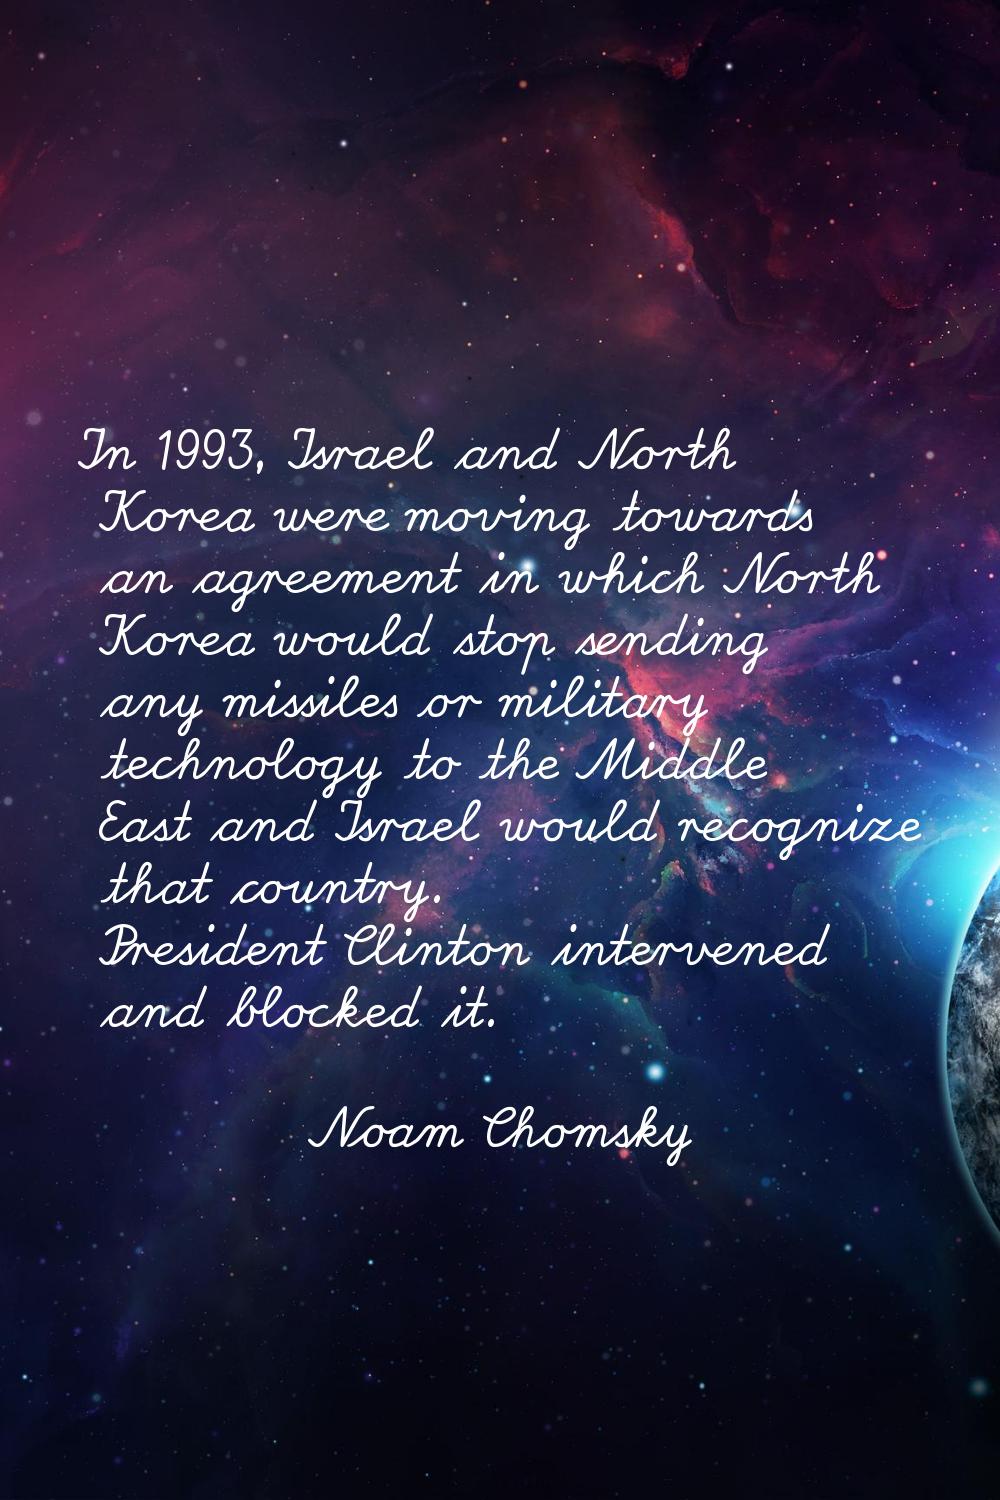 In 1993, Israel and North Korea were moving towards an agreement in which North Korea would stop se